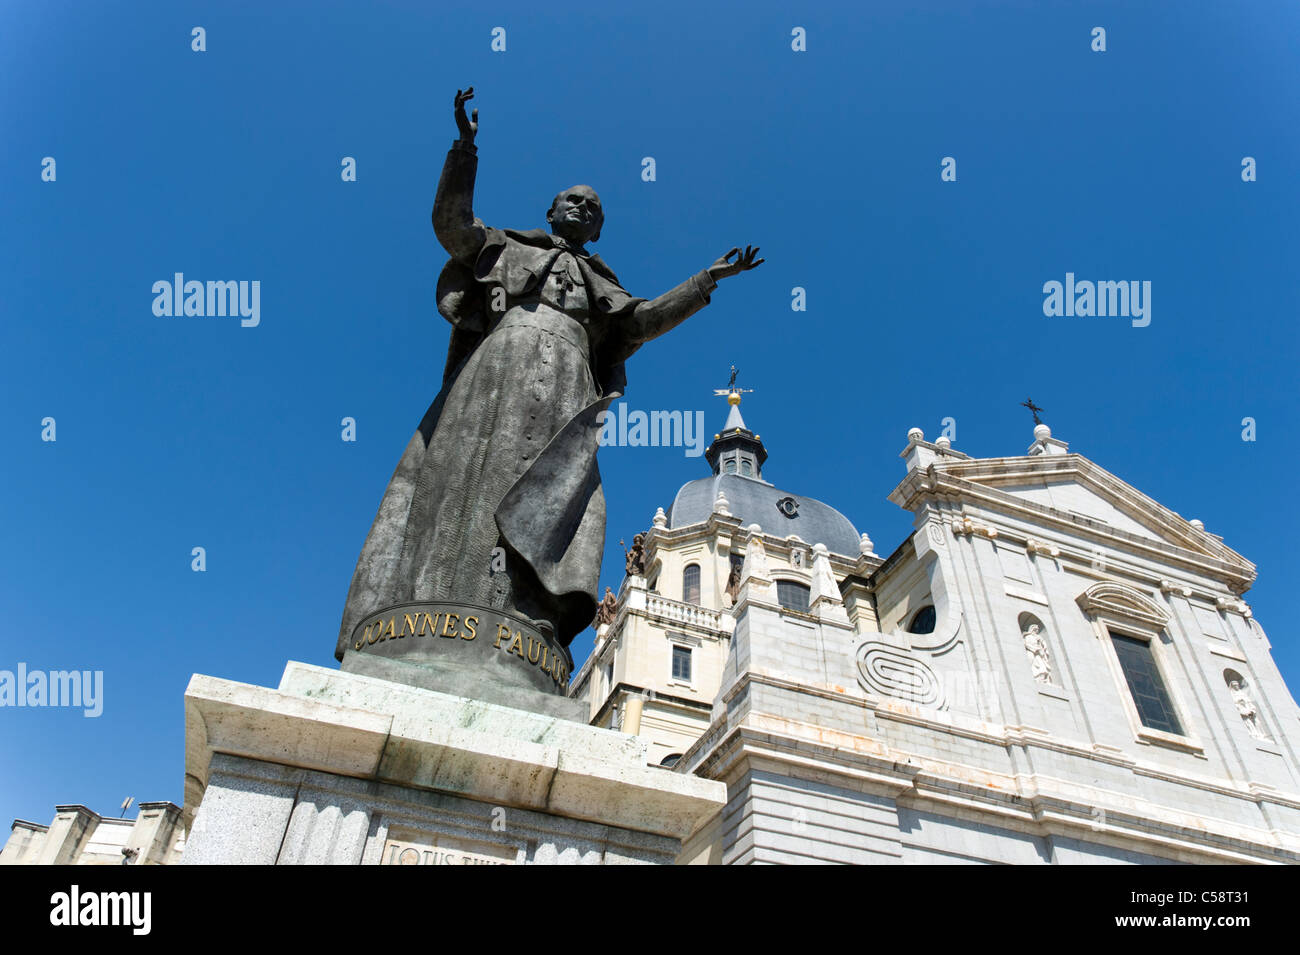 Statue of Pope John Paul II in front of the Almudena Cathedral, Madrid, Spain Stock Photo